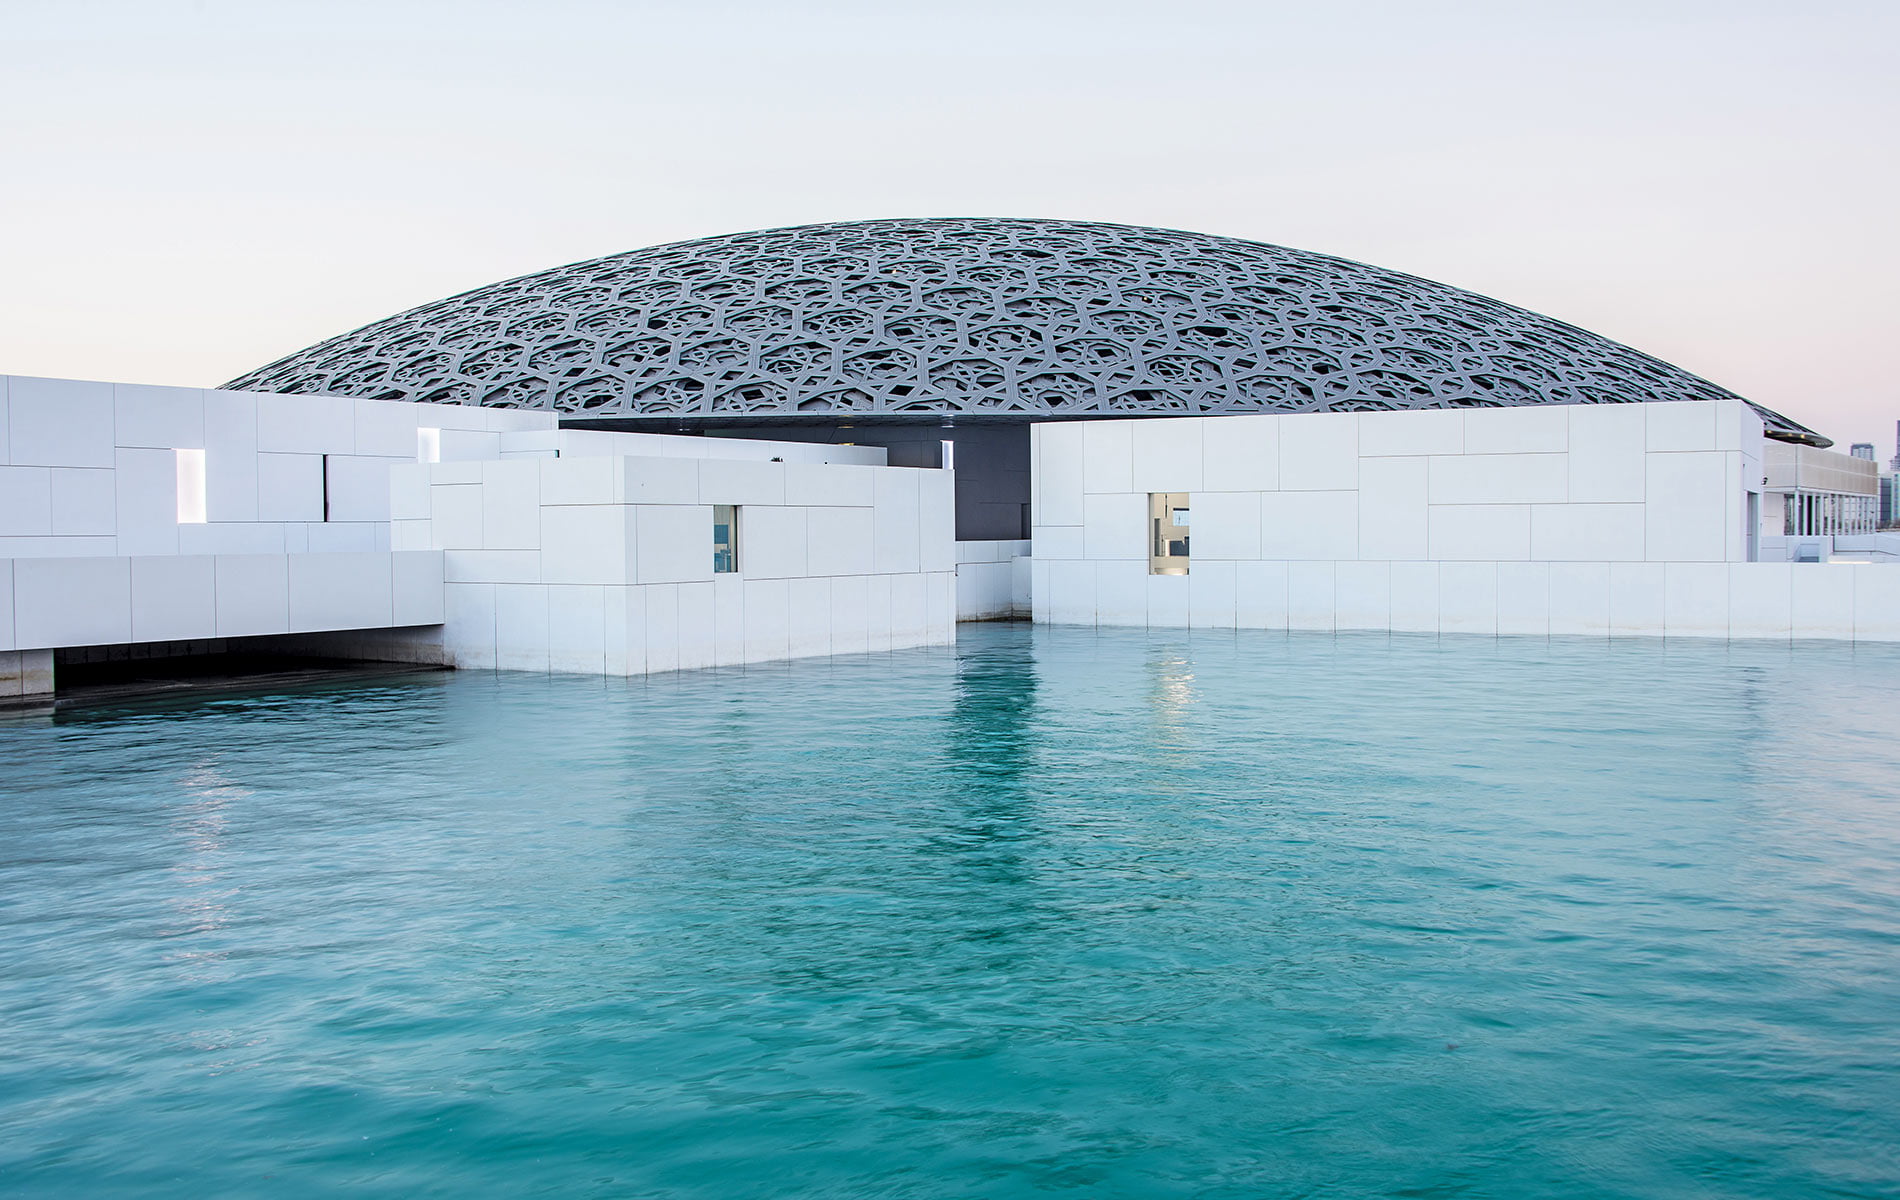 The Louvre at Abu Dhabi